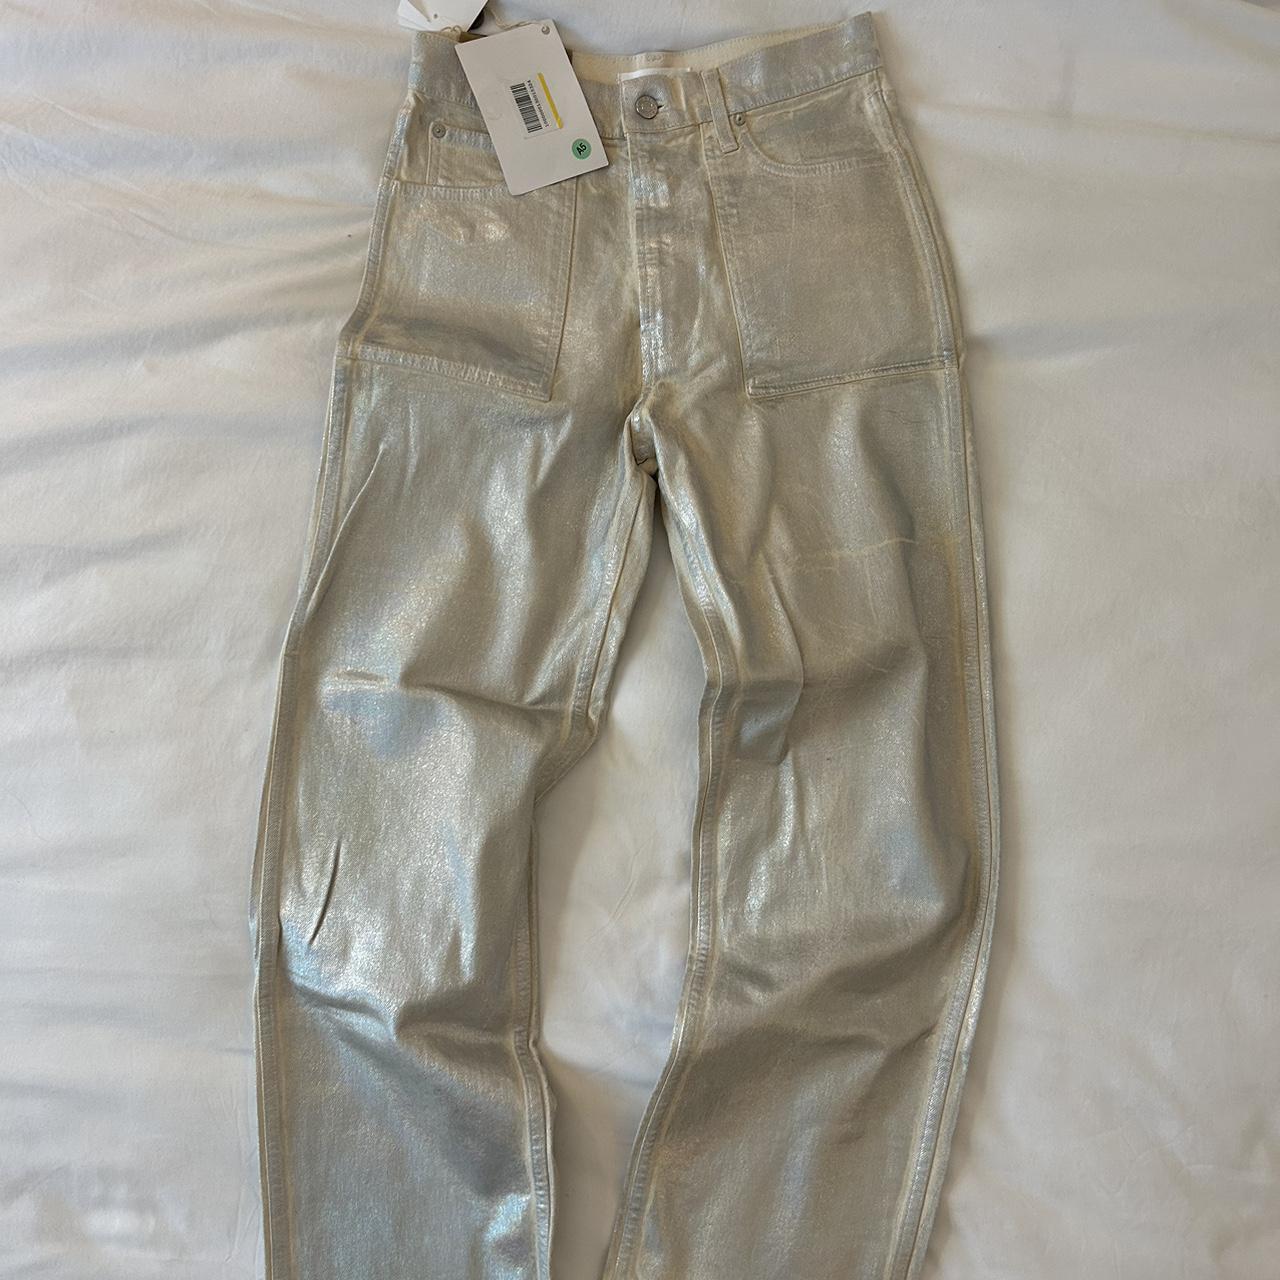 Shine in Style with Silver Metallic Pants